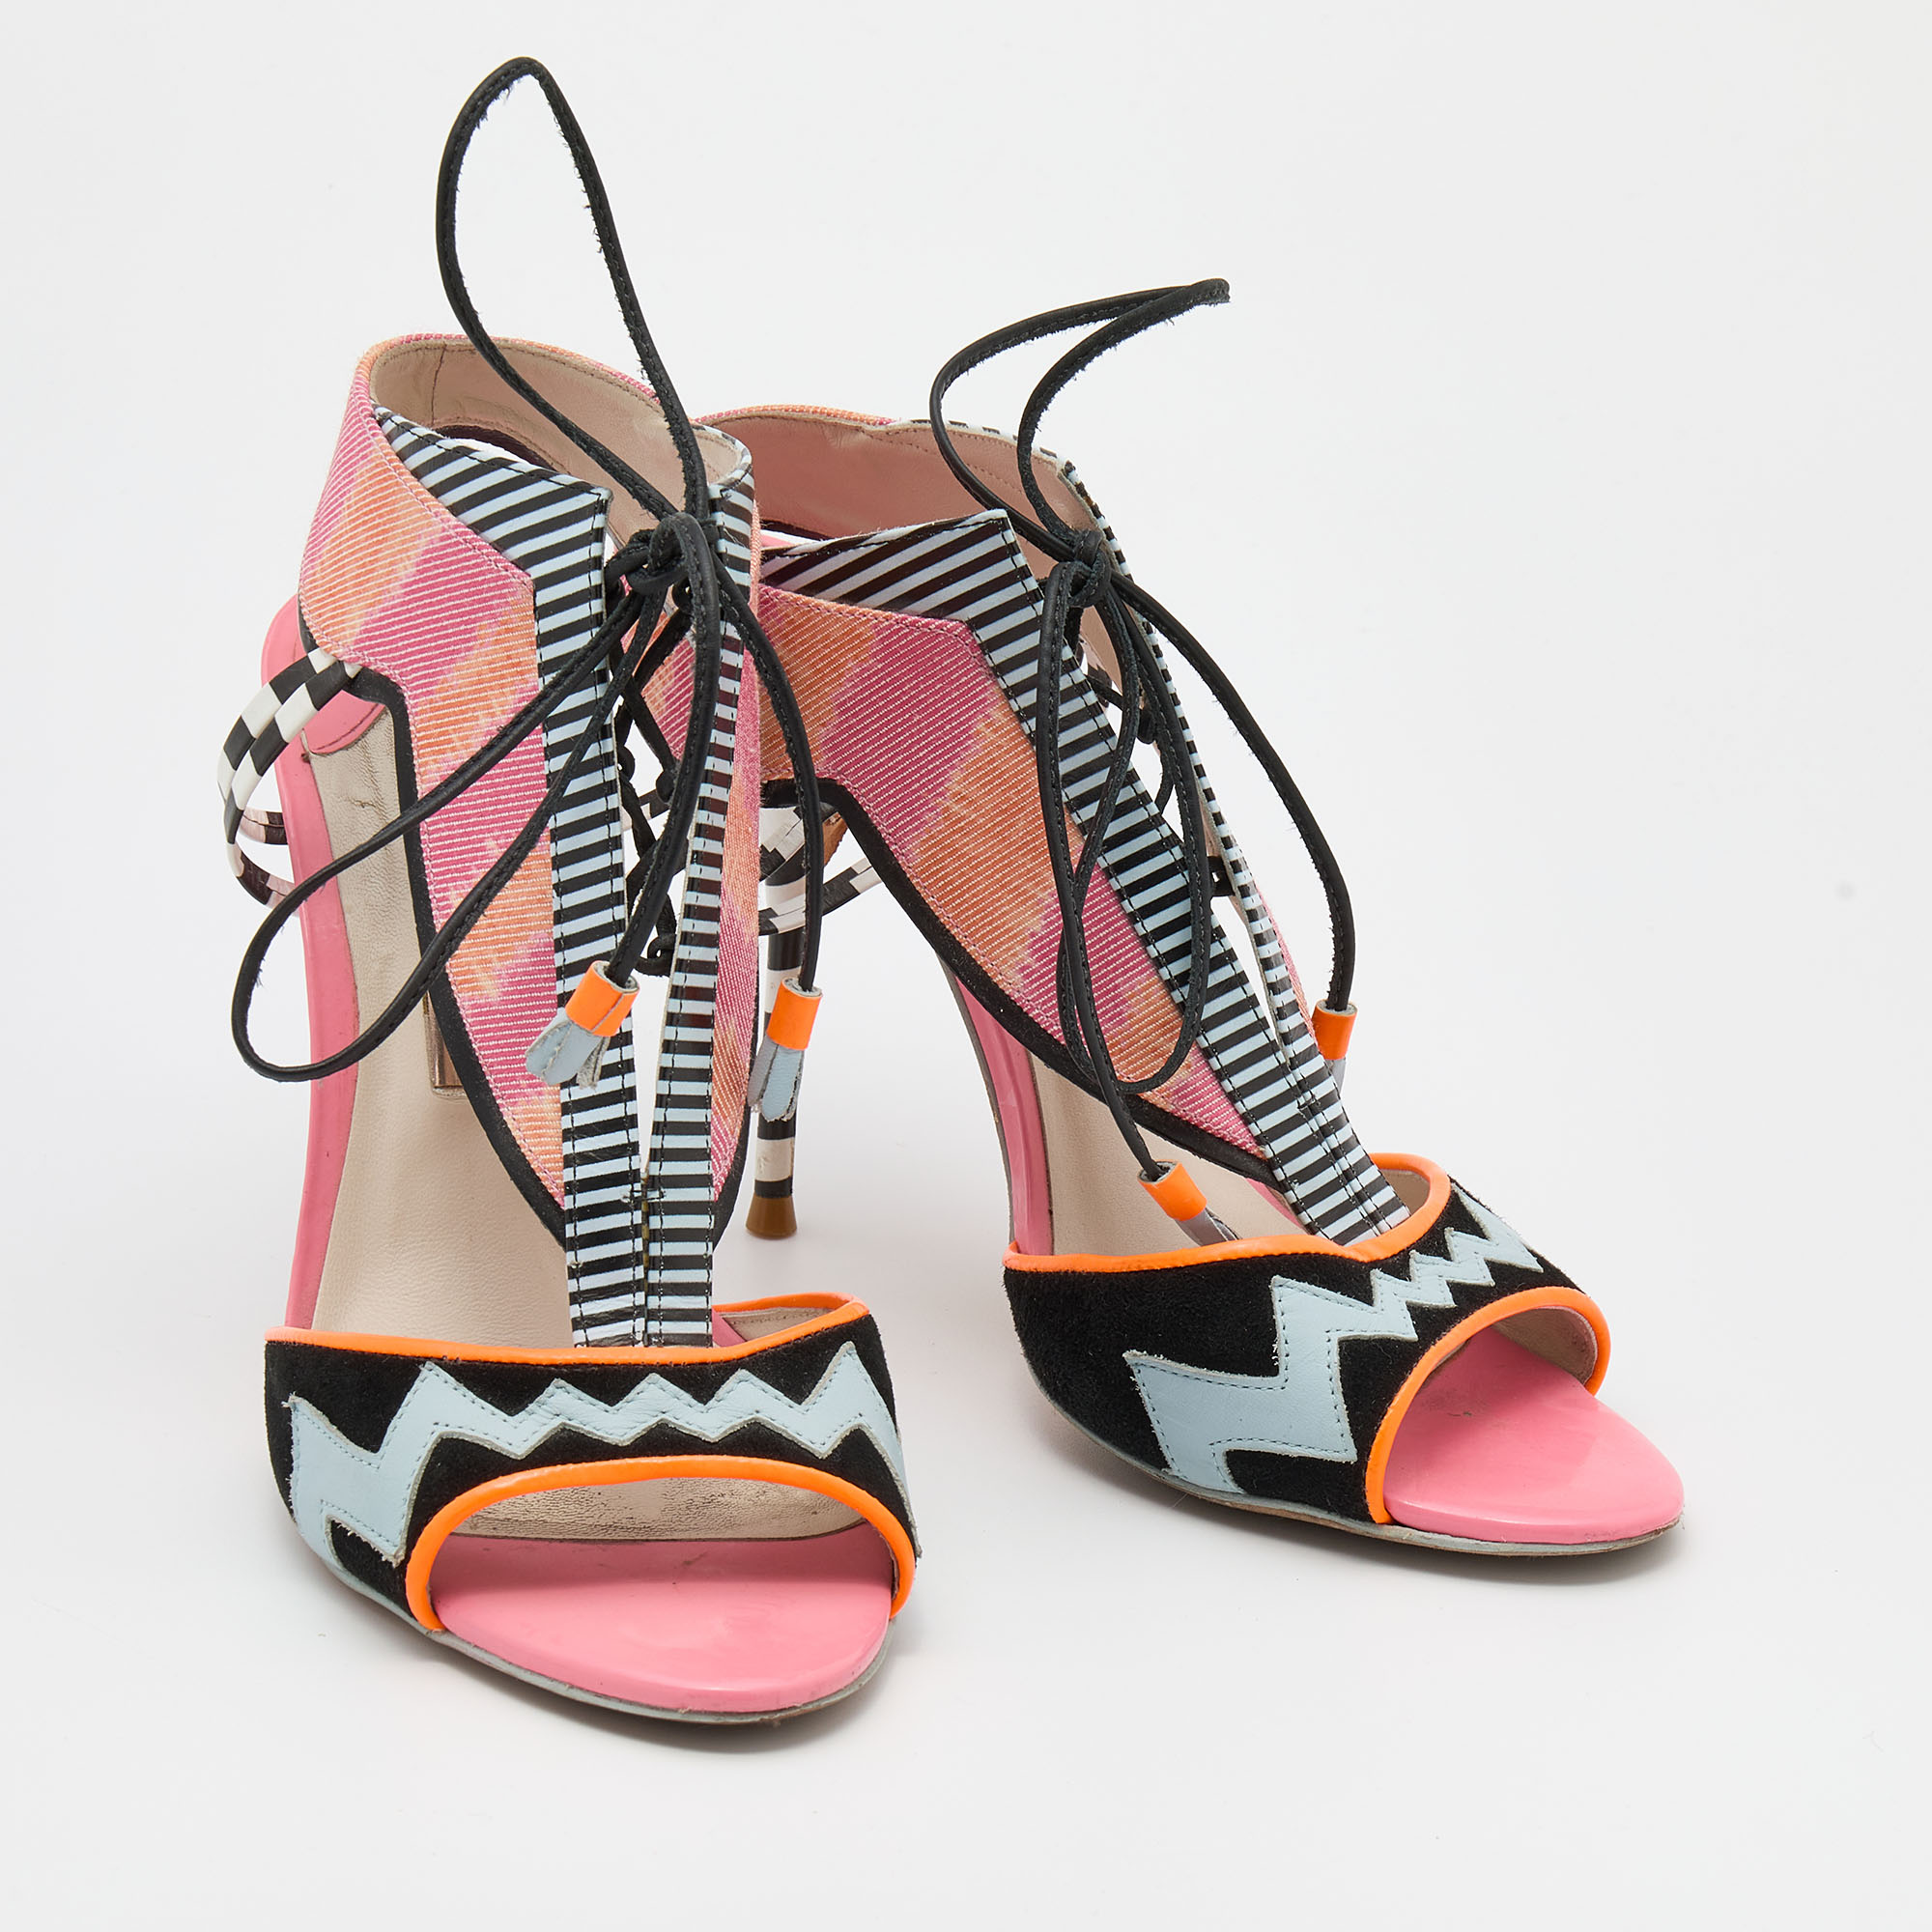 Sophia Webster Multicolor Leather And Canvas Leilou Strappy Sandals Size 38.5